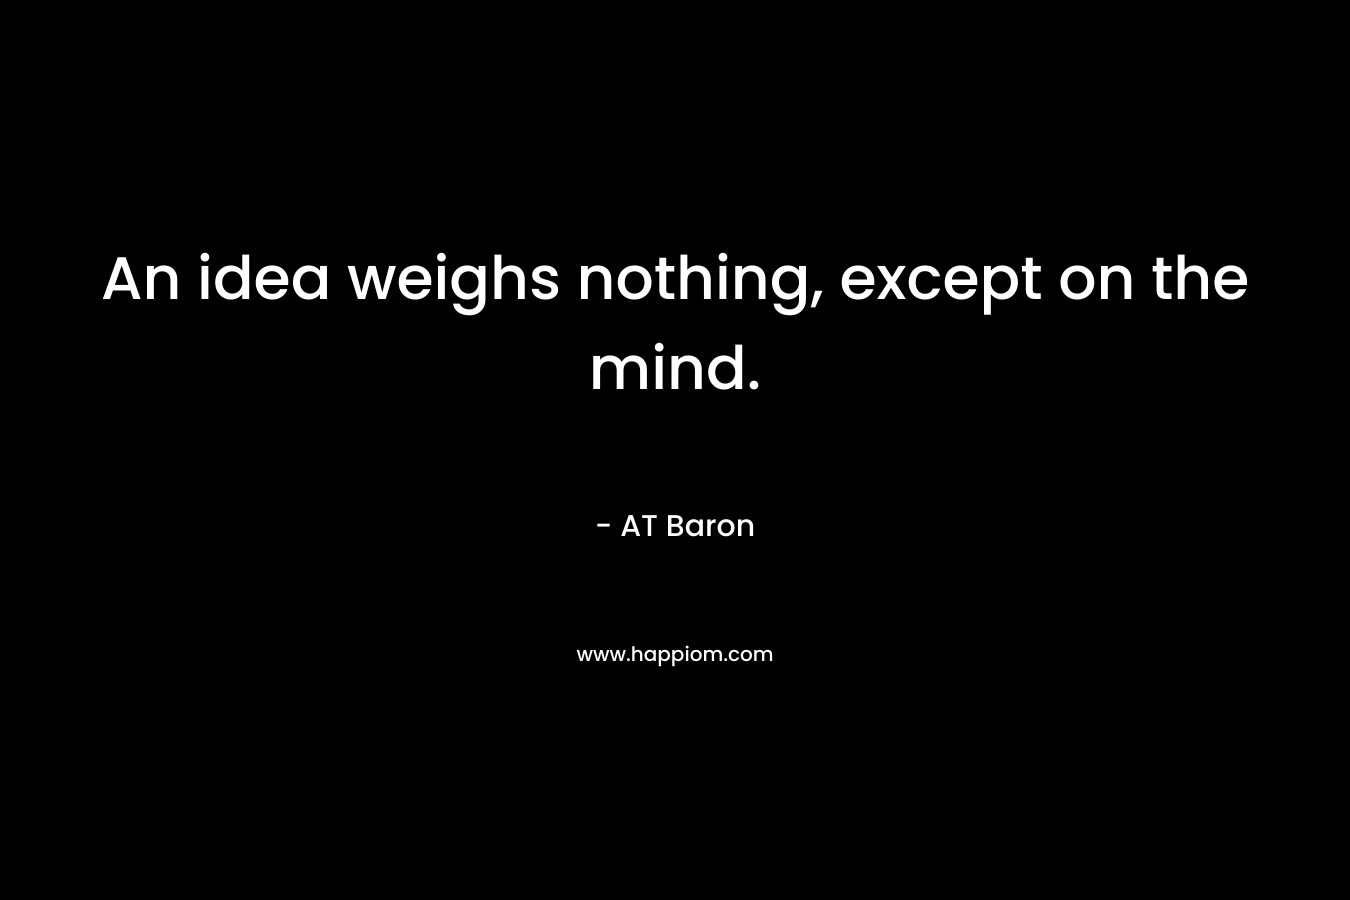 An idea weighs nothing, except on the mind. – AT Baron